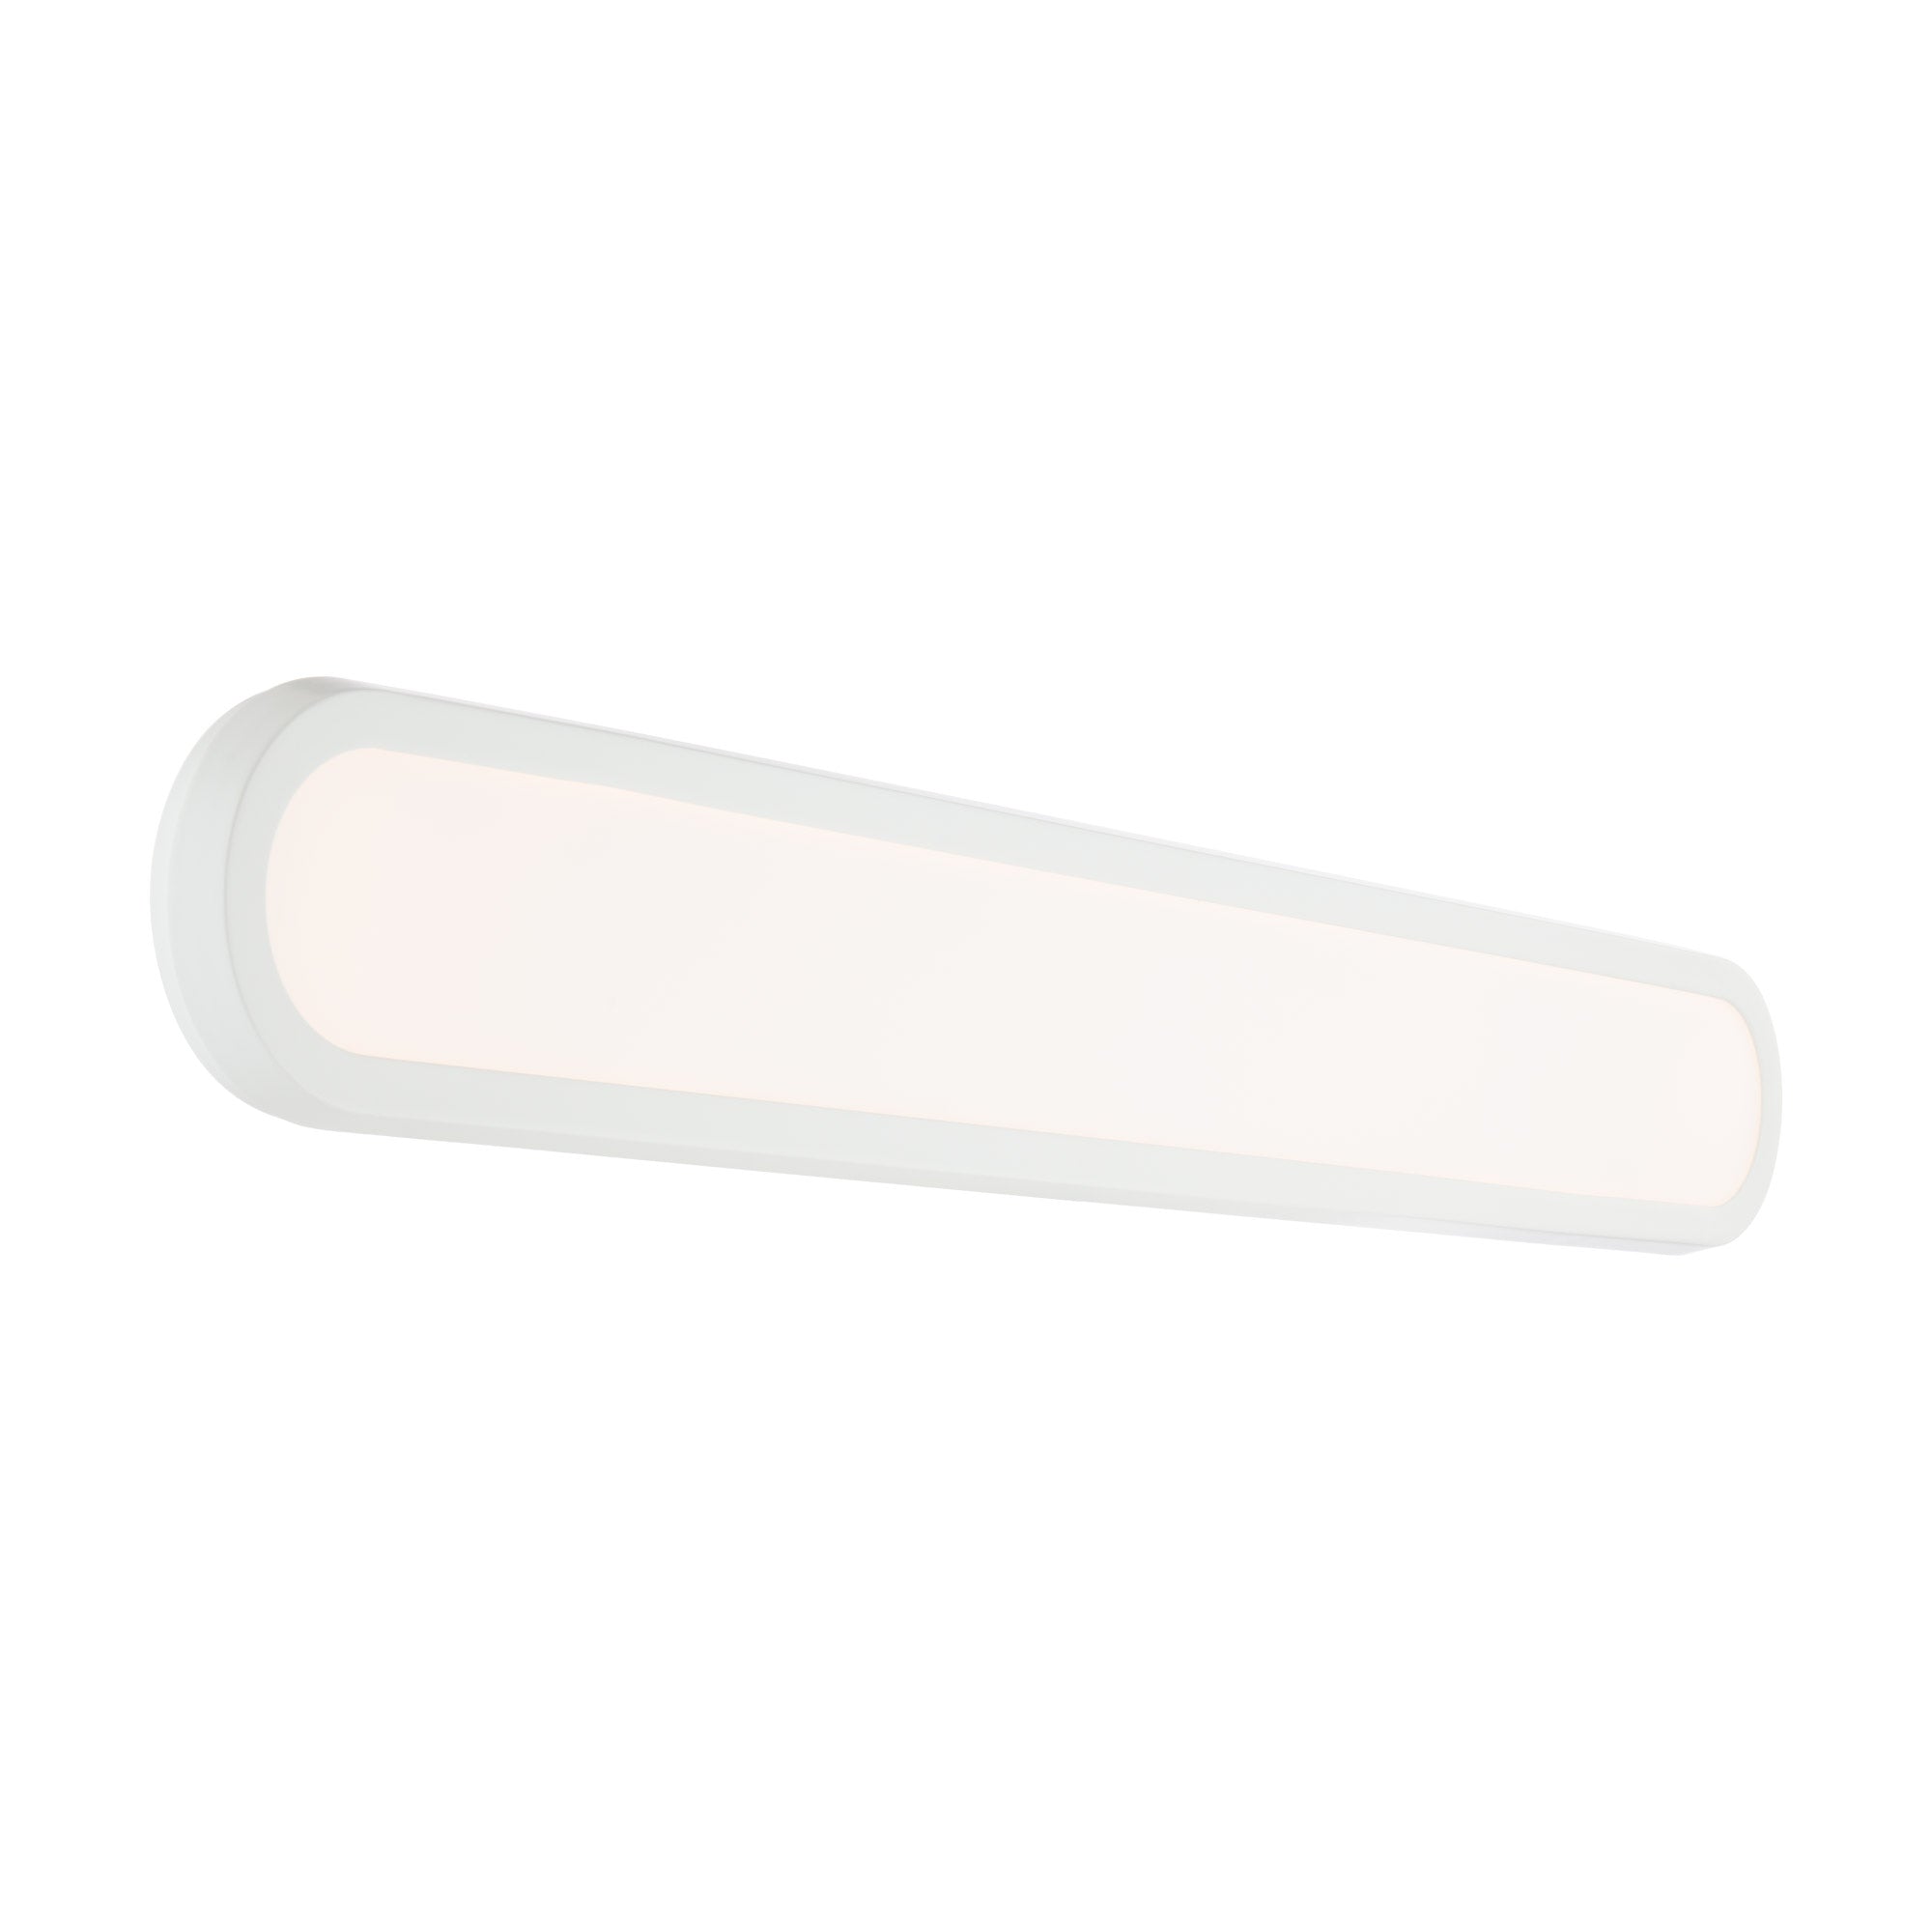 ARGO Bathroom sconce White INTEGRATED LED - WS-93037-WT | MODERN FORMS